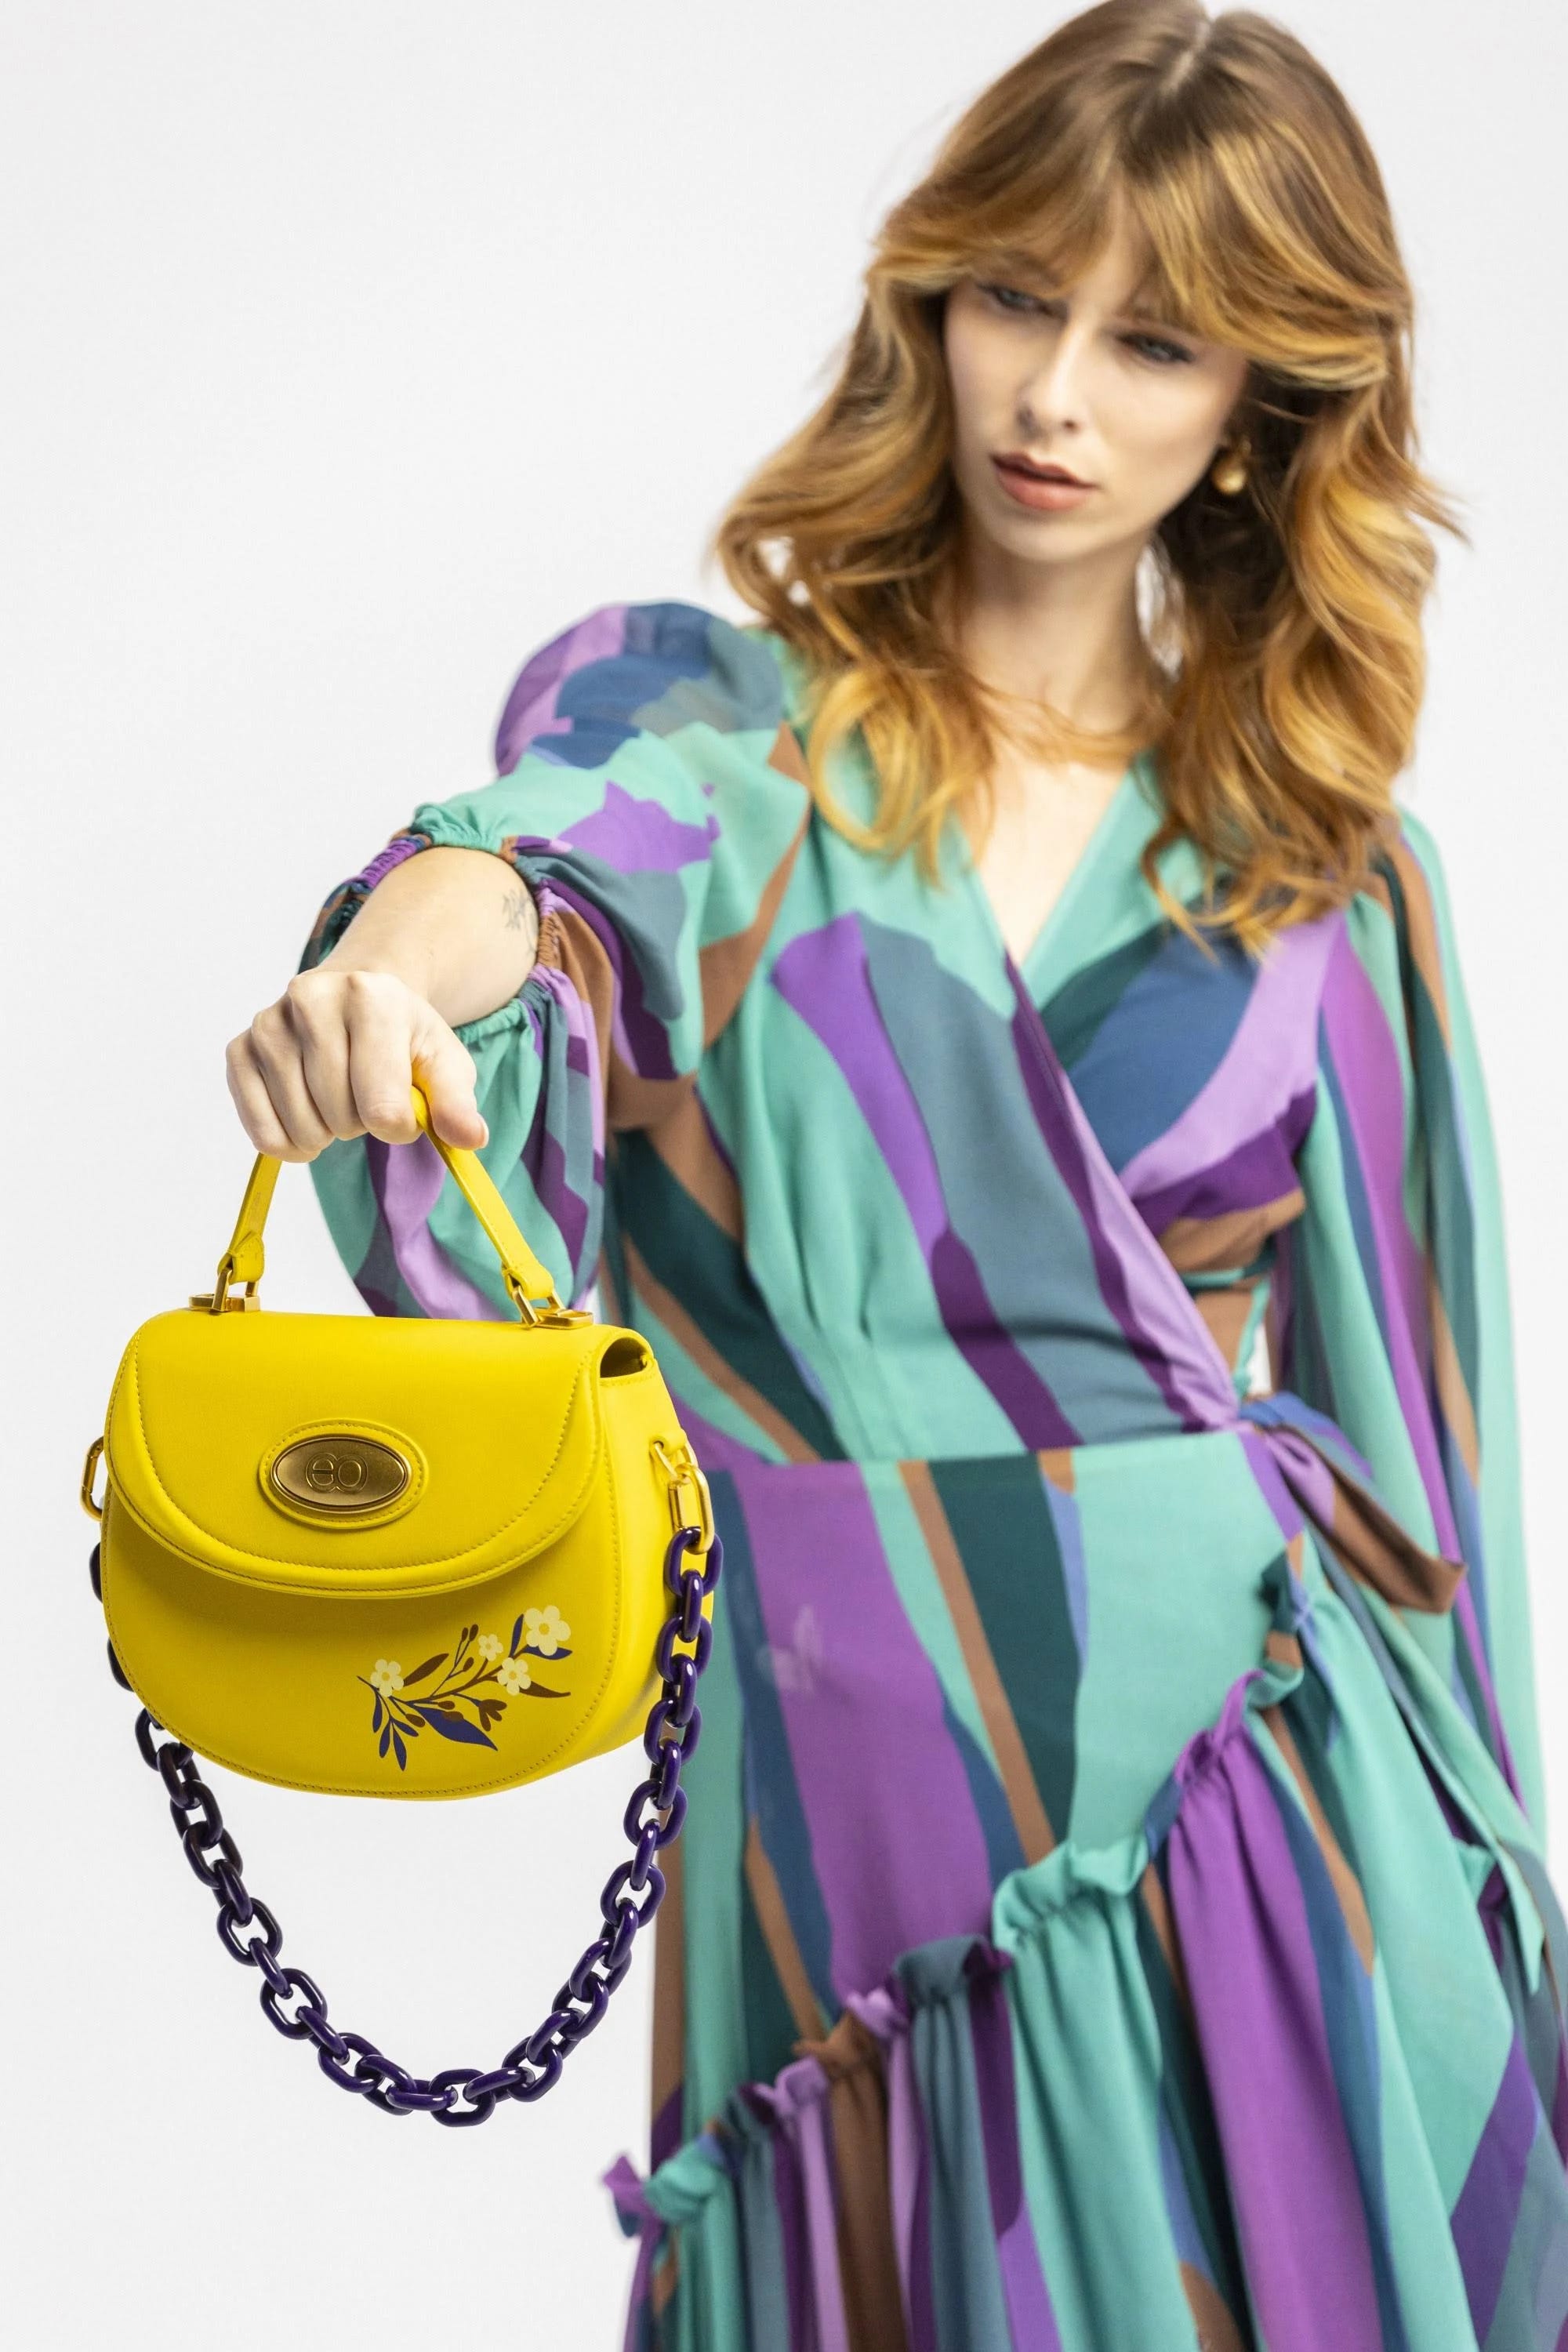 Chic Mustard Yellow Leather Purse with Floral Pattern - A Gift Favorite for Any Occasion | Image